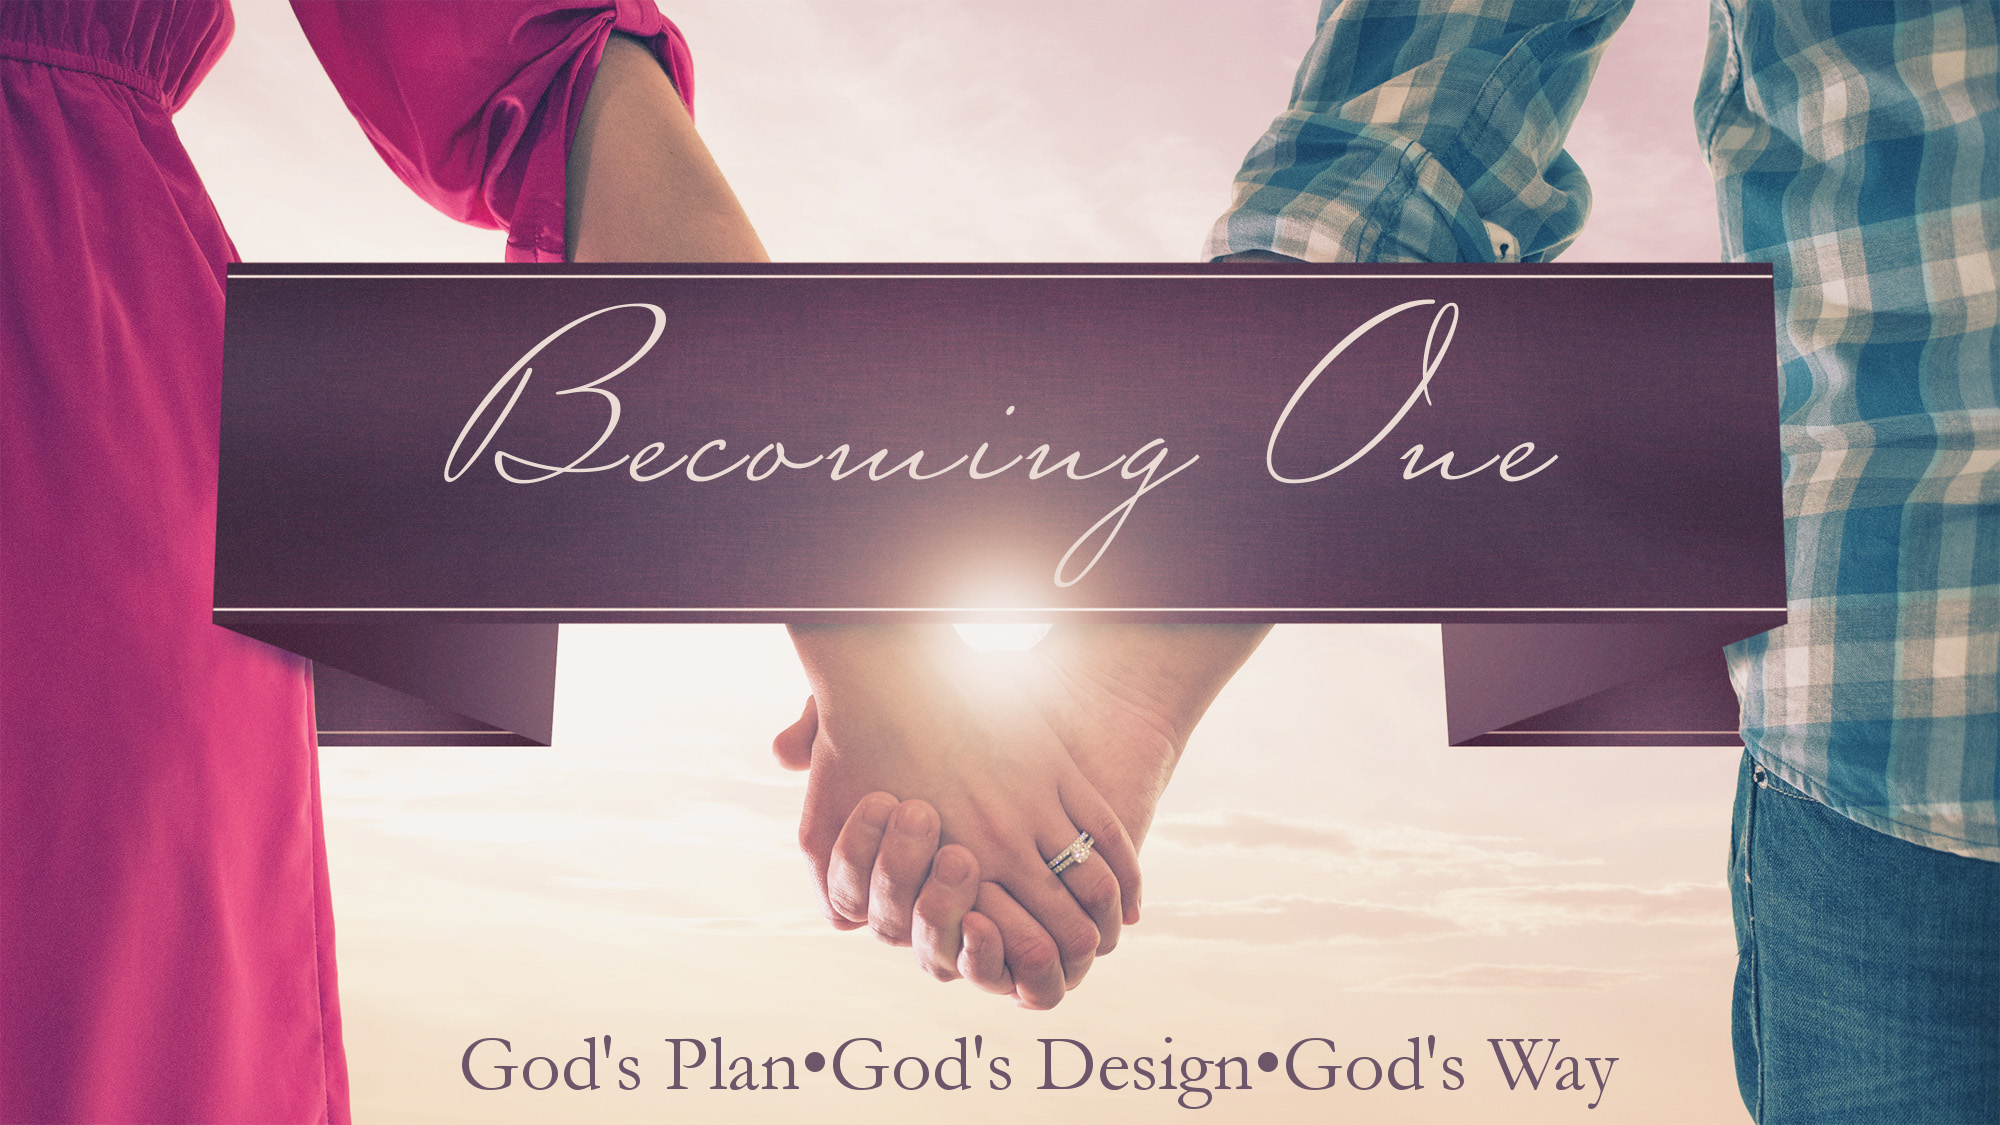 BEGINNINGS - It is Good - “becoming one - God’s Plan•God’s Design•God’s Way”